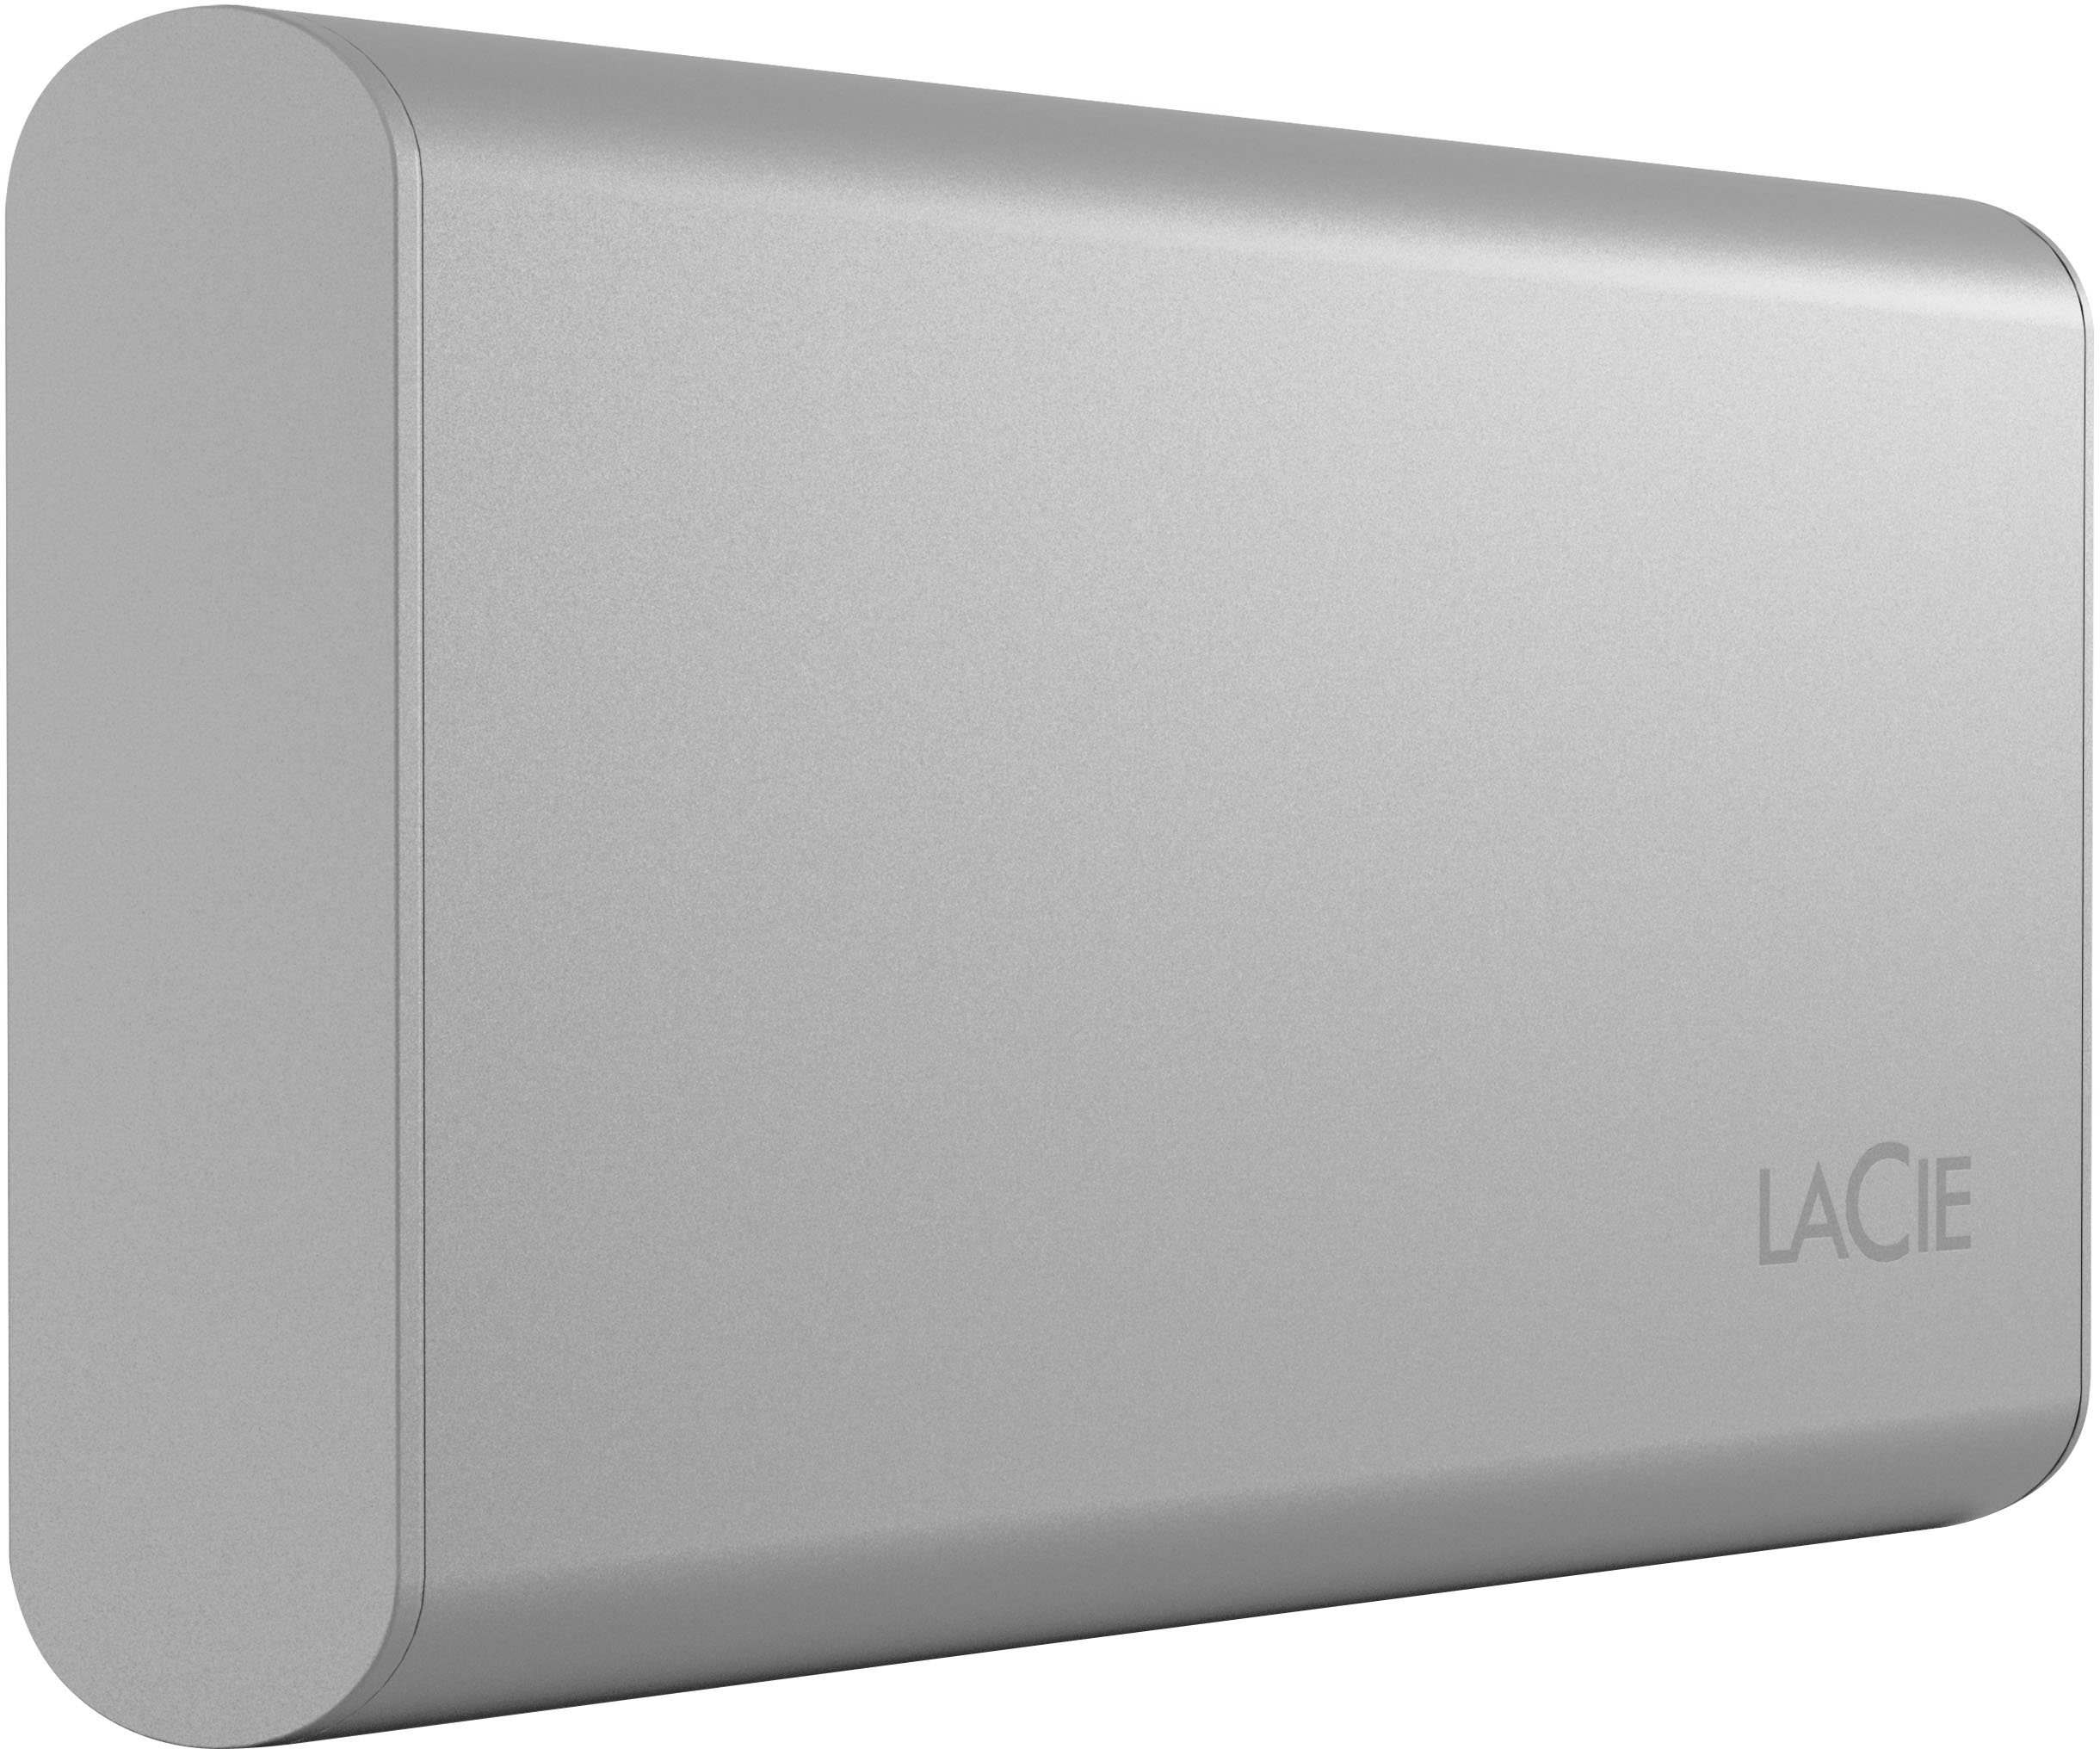 LaCie 500GB External USB-C, USB 3.2 Gen 2 Portable SSD with Rescue Data Recovery Services - Best Buy